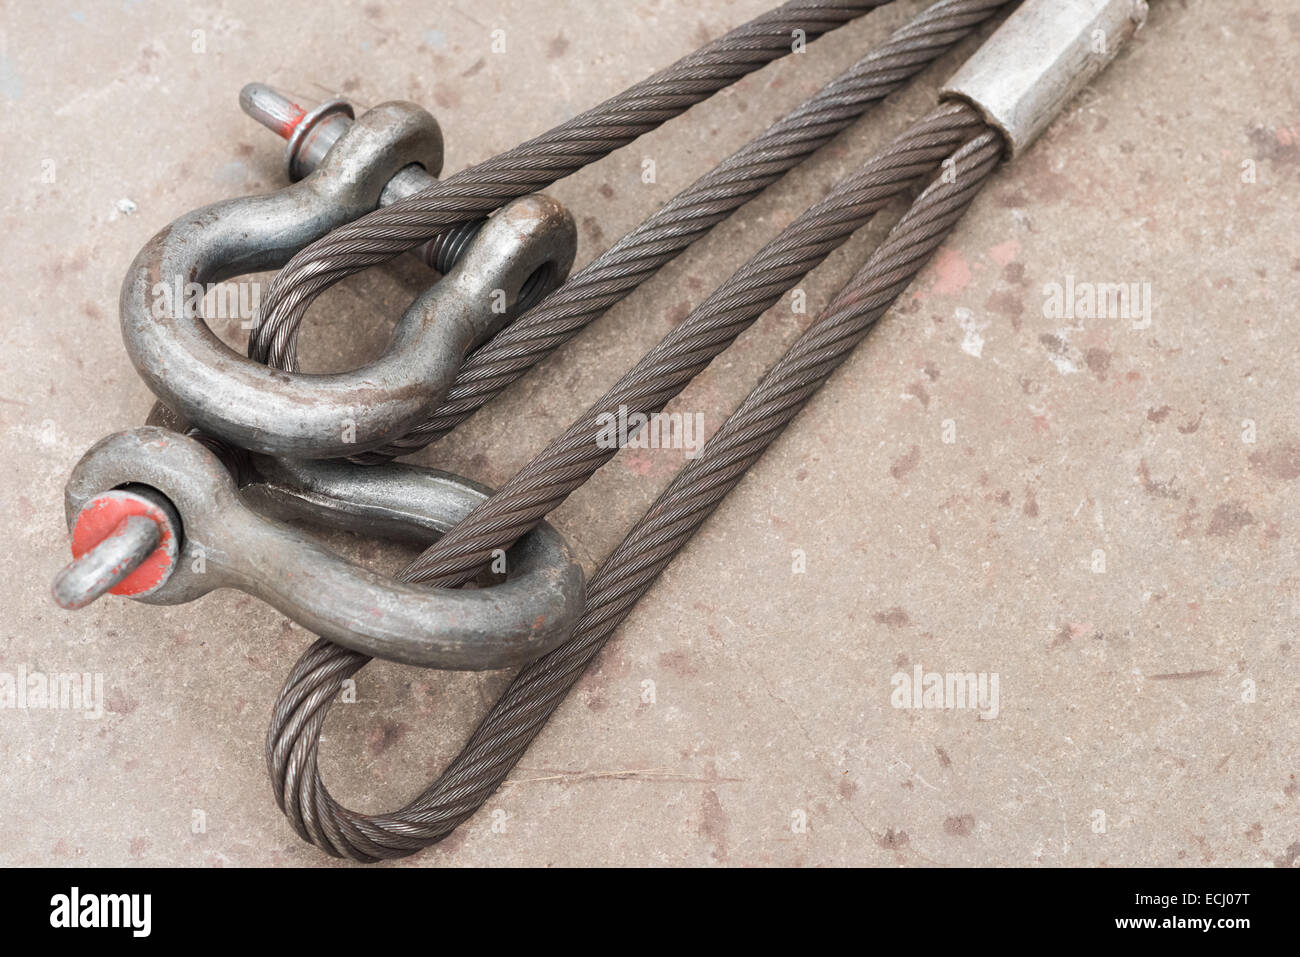 Two used steel wire loops on a concrete floor with one shackle through each. Stock Photo